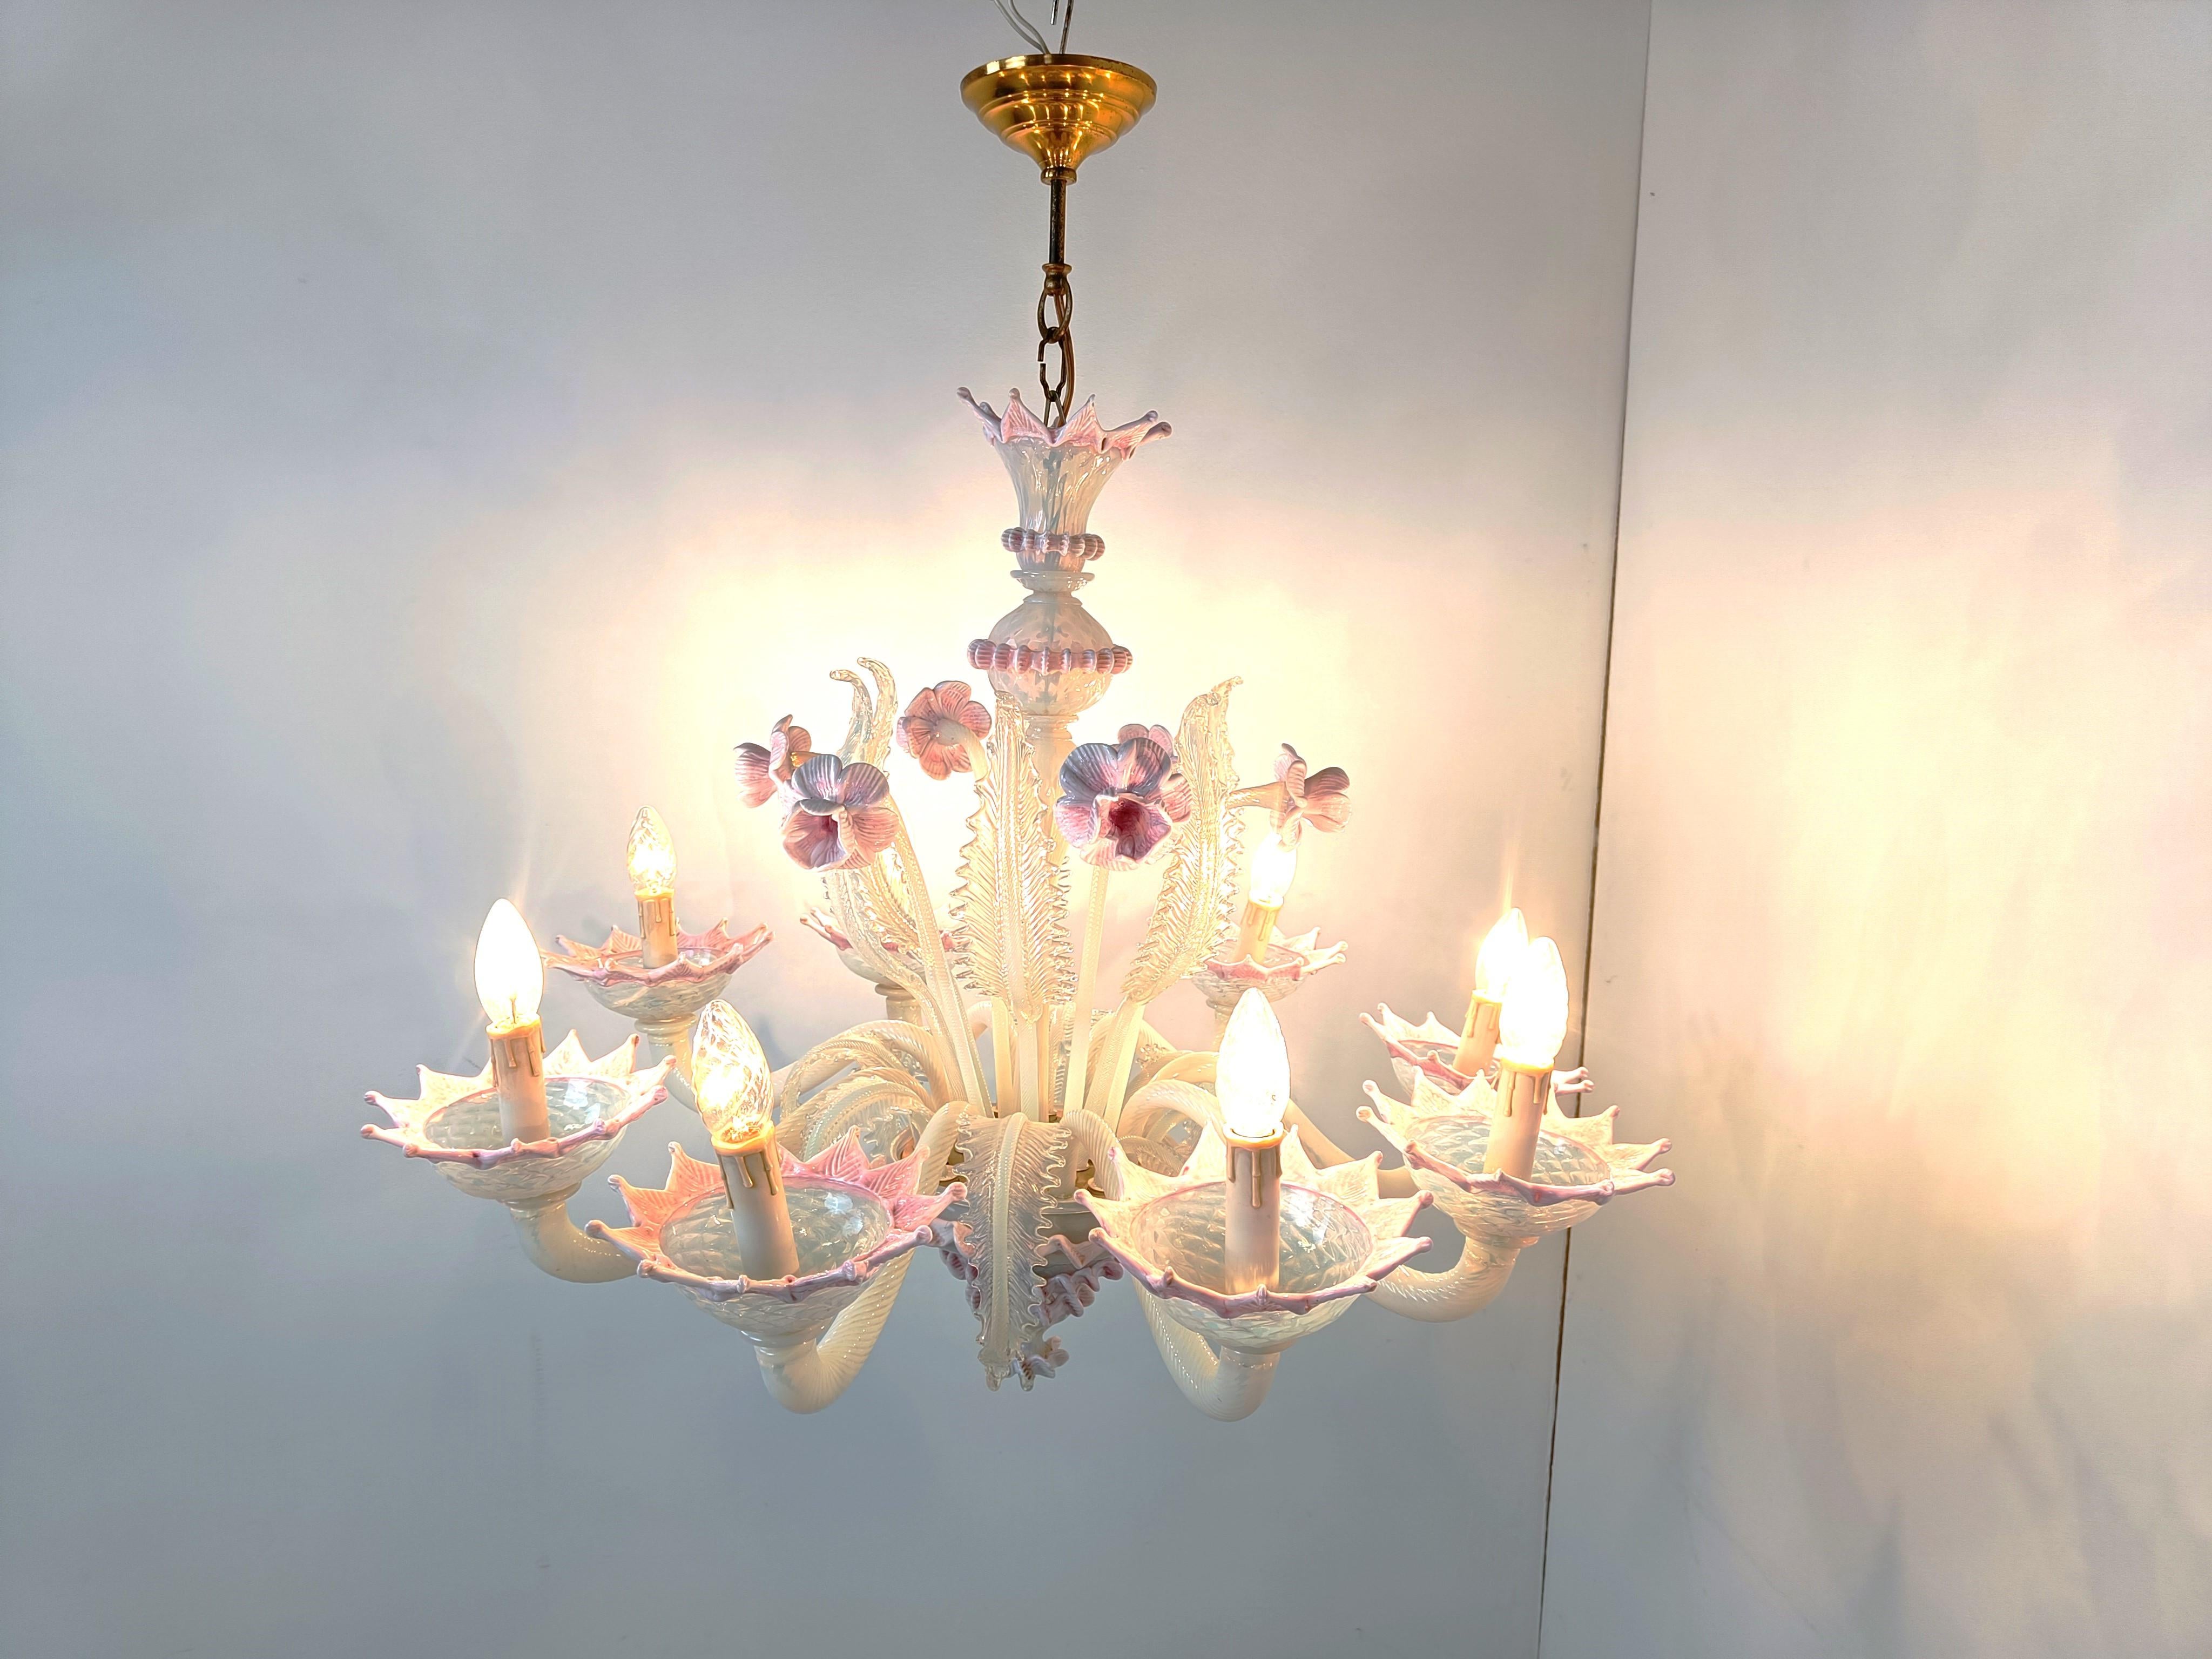 Stunning mid century murano glass chandelier.

It consists of 8 arms with candelabra lights.

The chandelier looks very elegant and has beautiful hand made flower and leafs.

Complete and good condition, tested and working.

1950s - Italy,